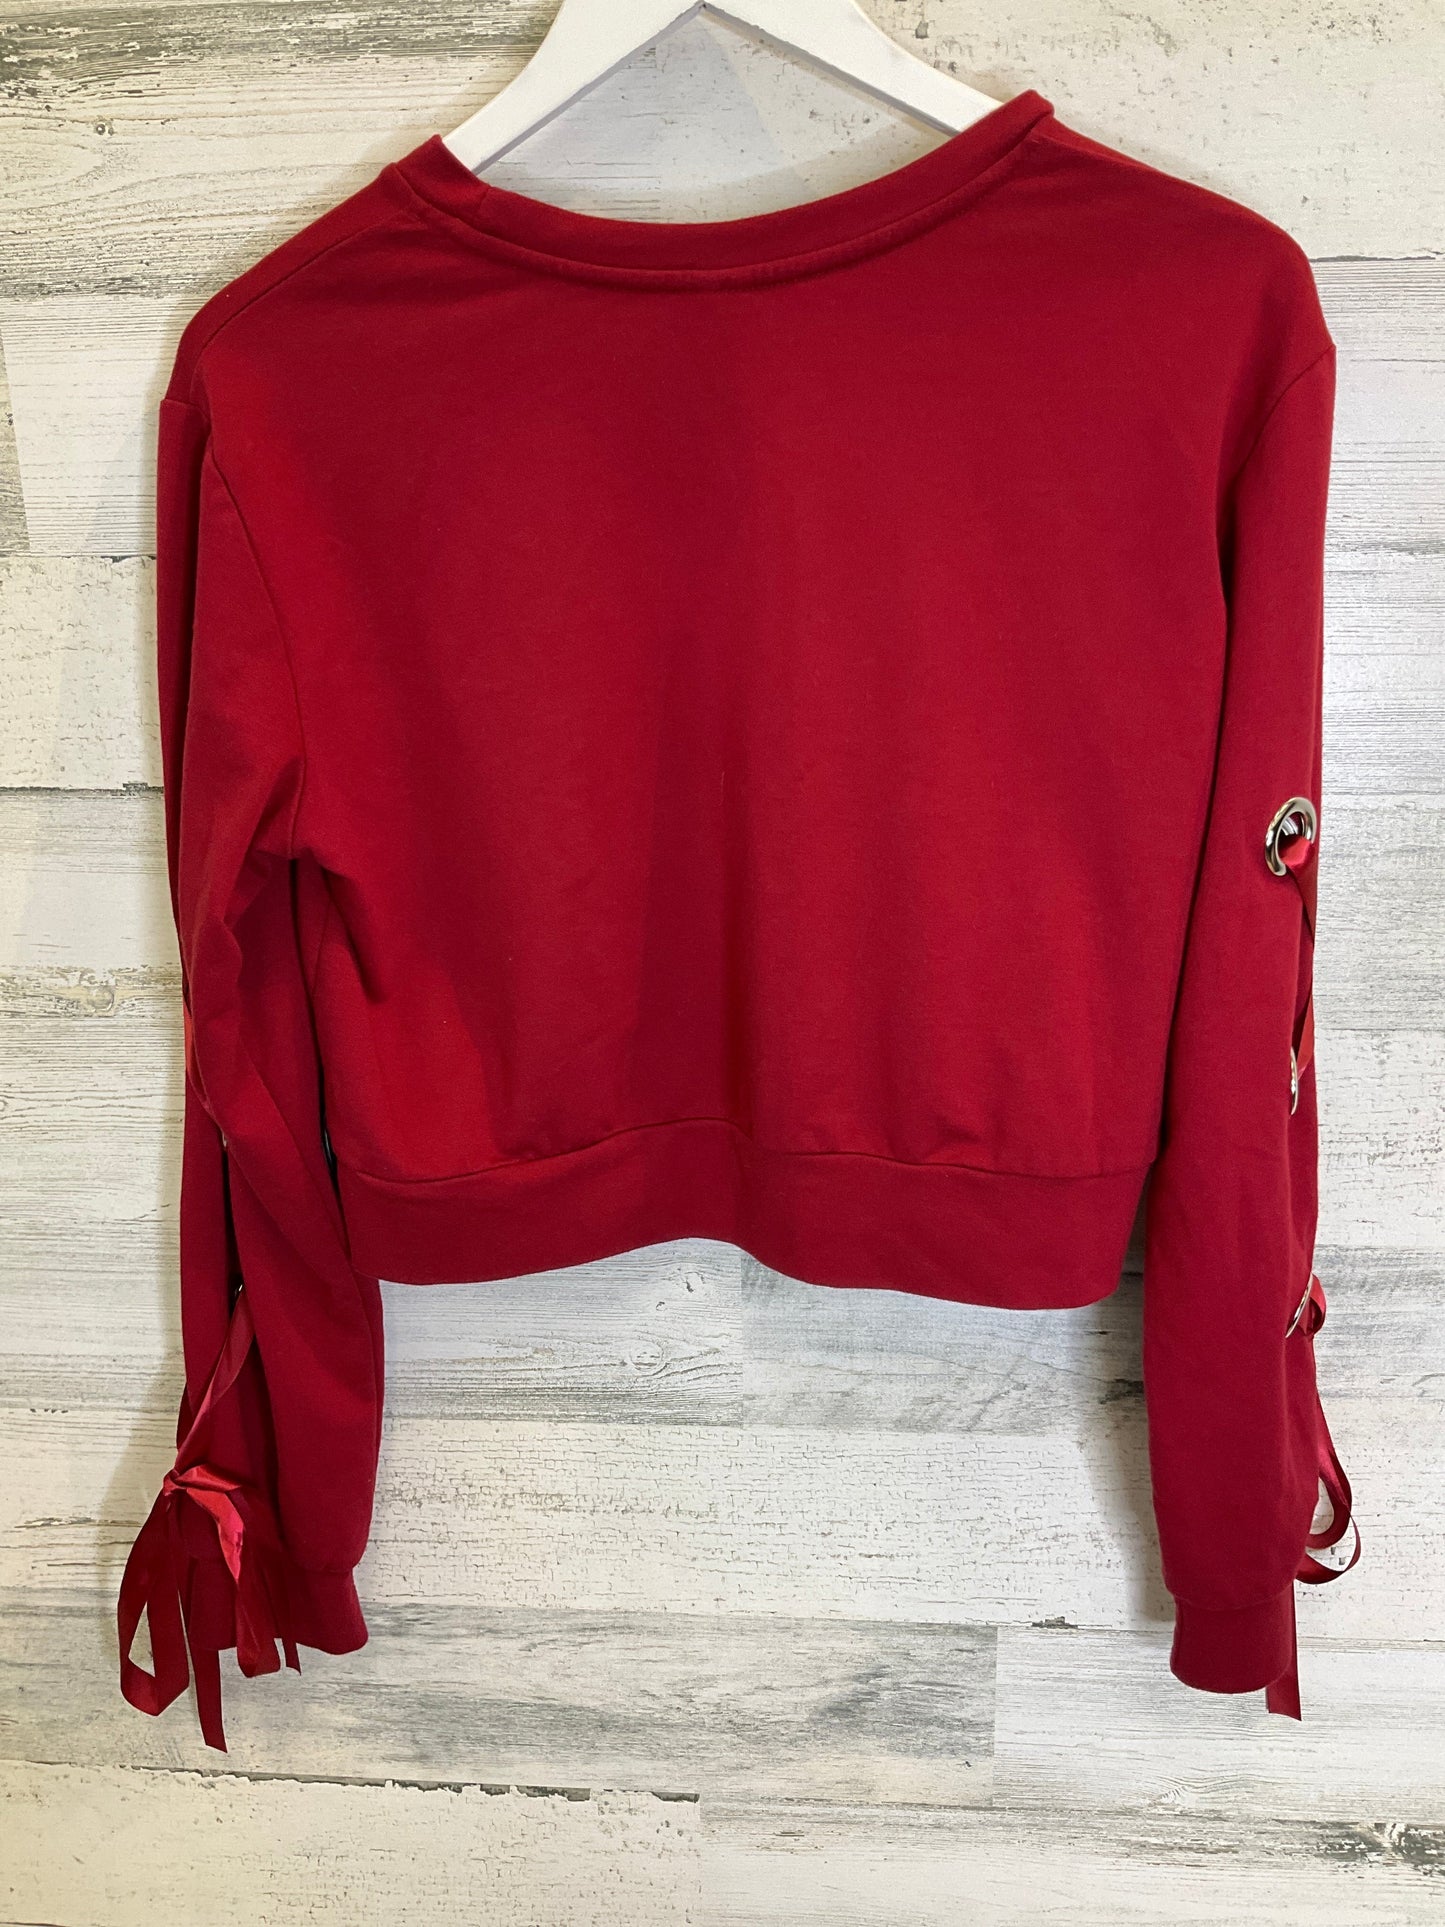 Red Top Long Sleeve Clothes Mentor, Size Xs